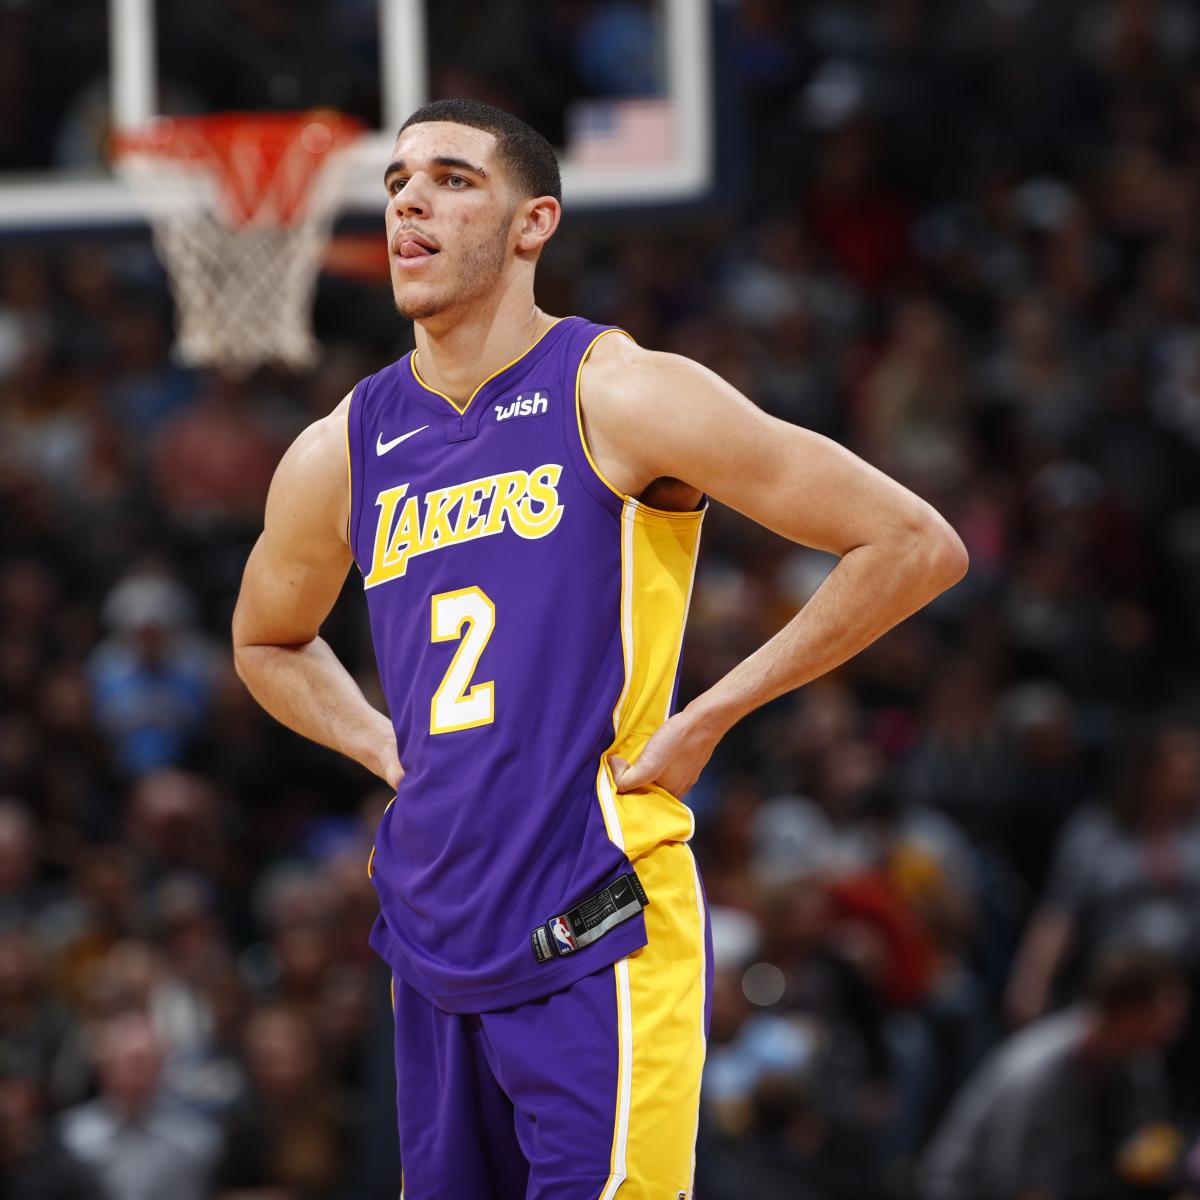 Lonzo Ball continues to struggle with shot as Lakers fall to Wizards